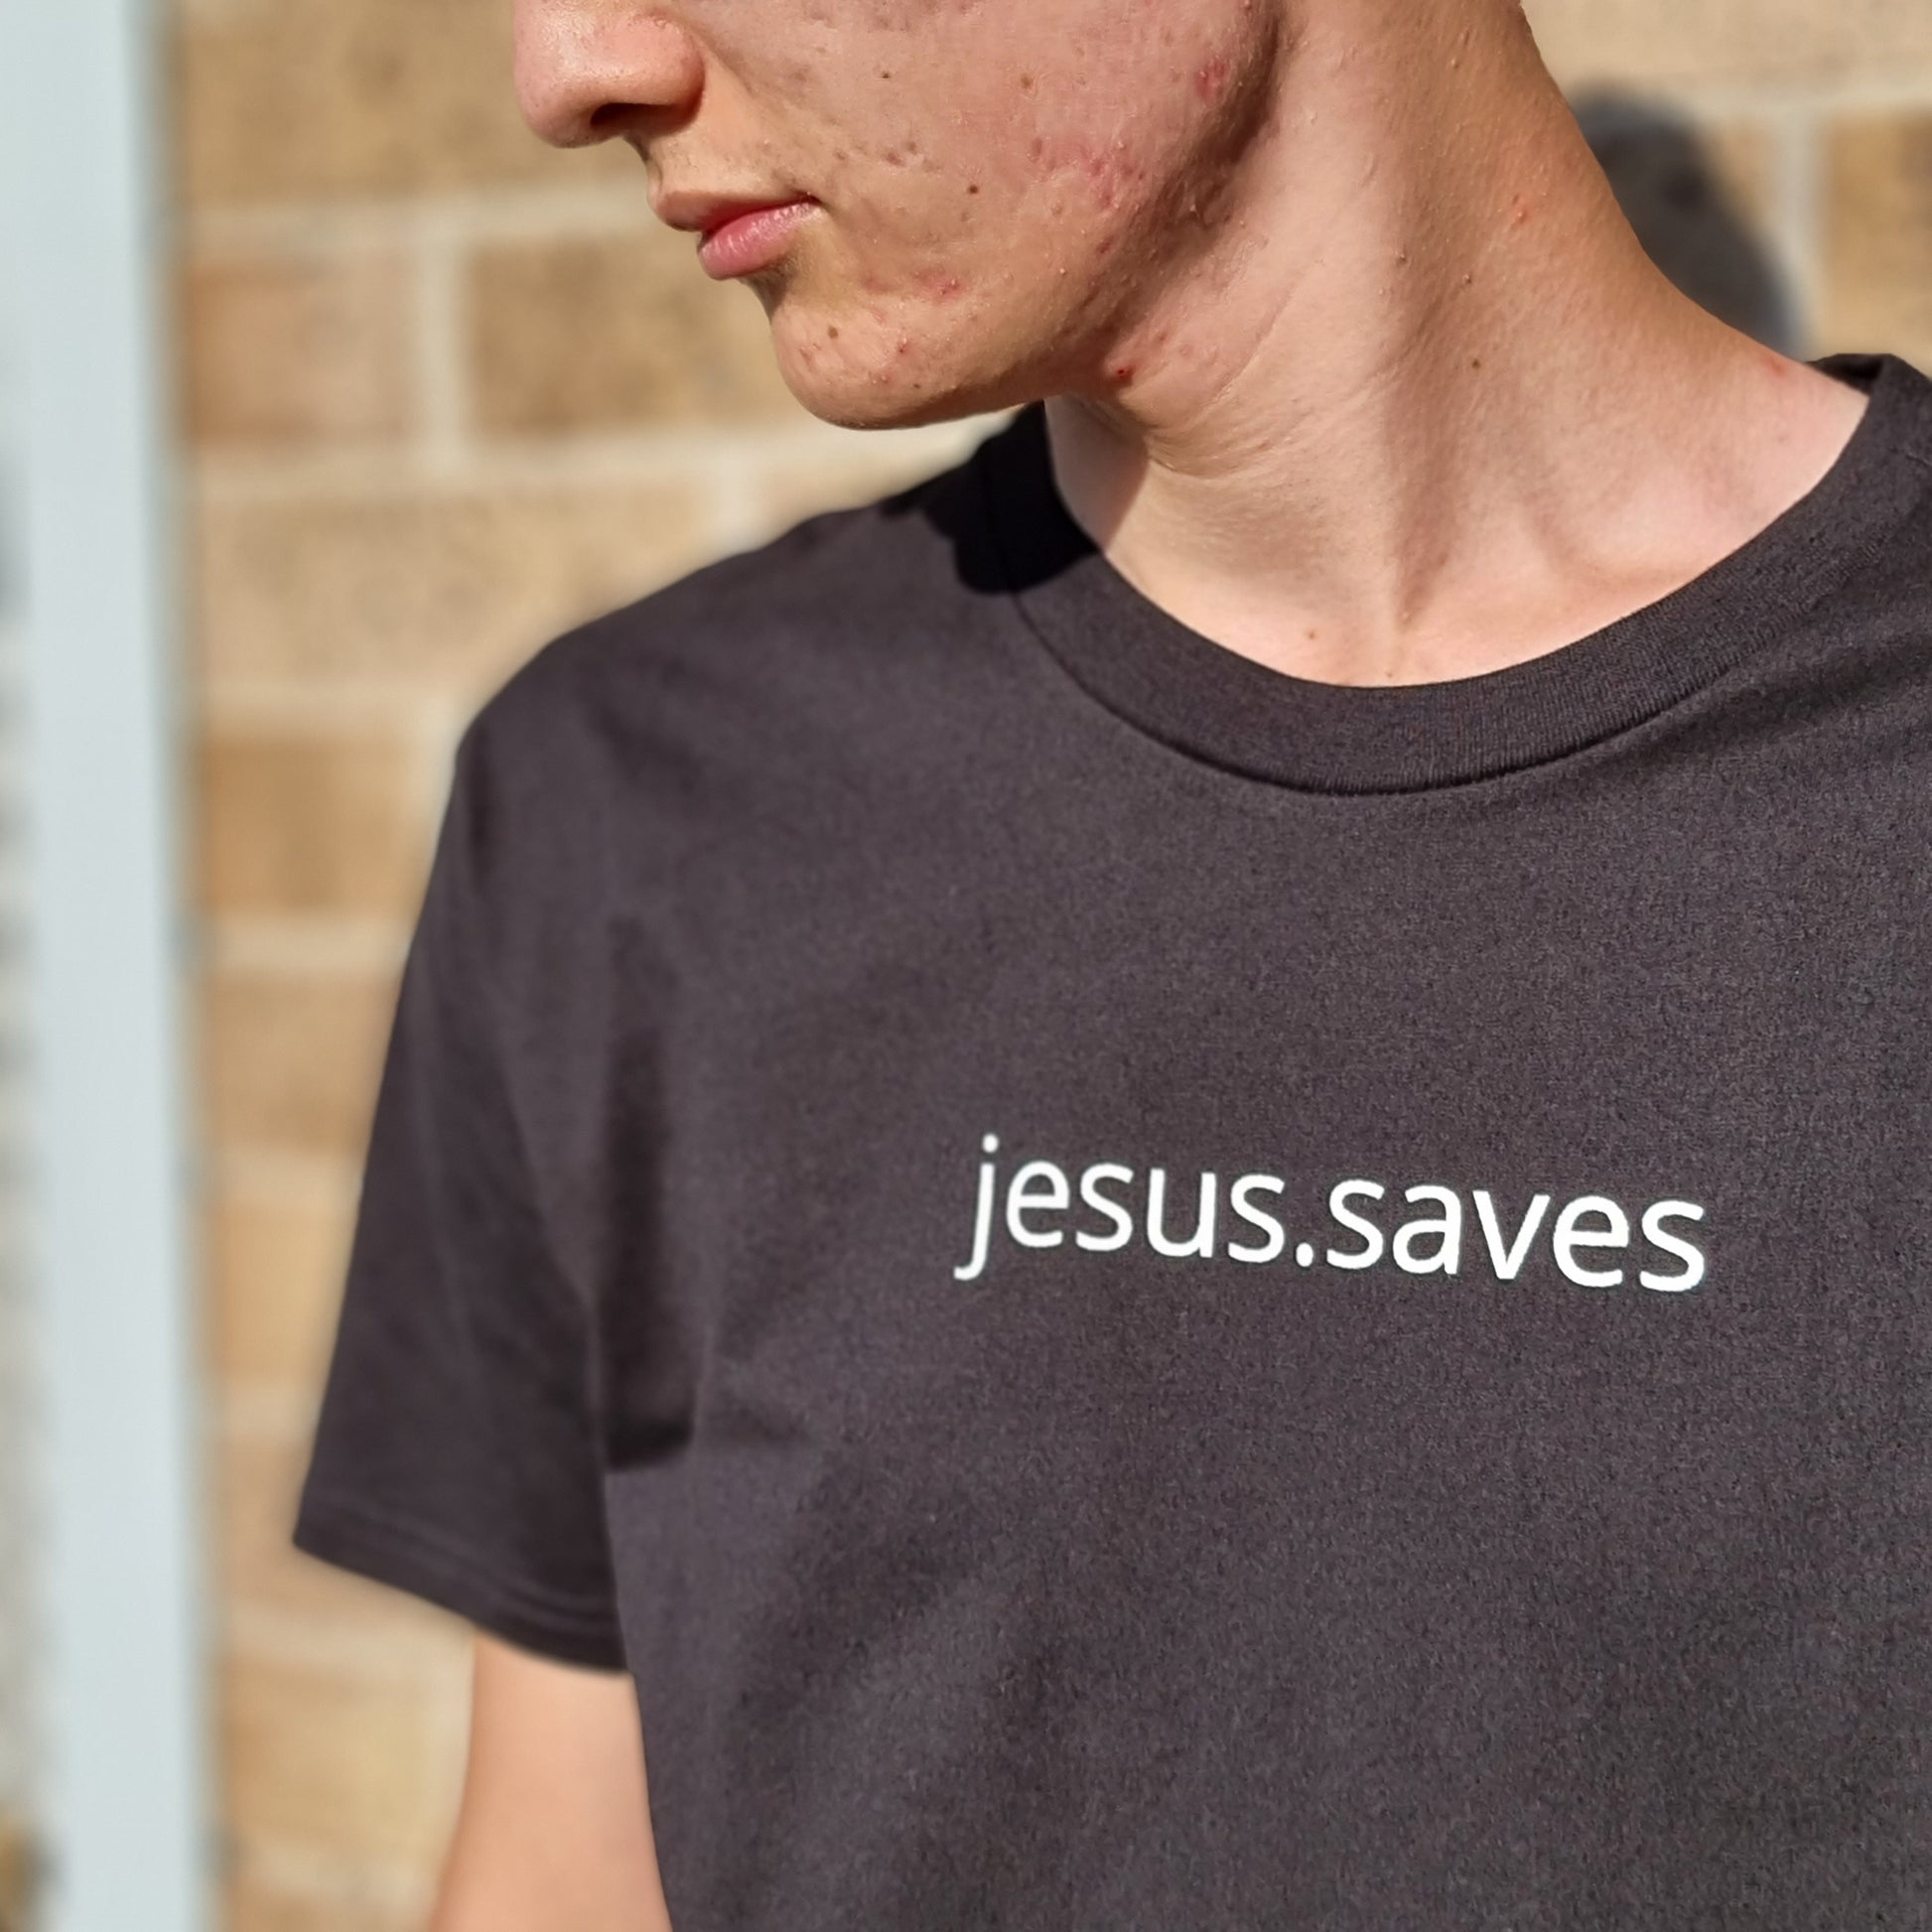 jesus.saves design written across chest in simple clear all lowercase font. Model wears black tee with white ink text. Brick wall behind and he is looking down. Print size is approx 2cm high and 20cm wide